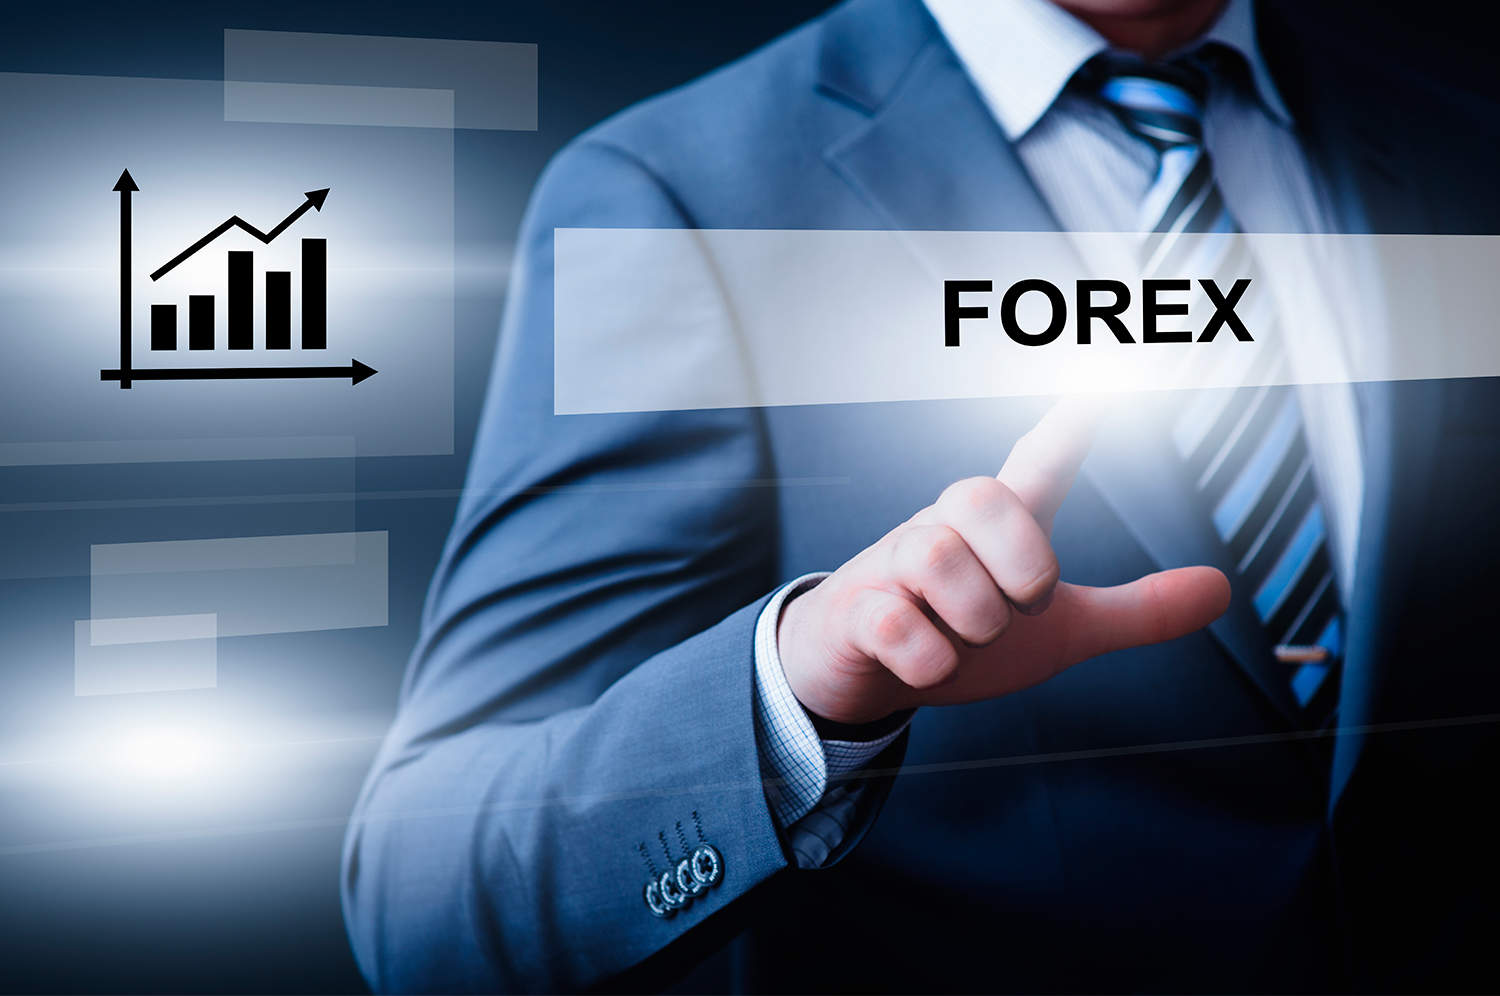 Can forex transactions take place on exchange